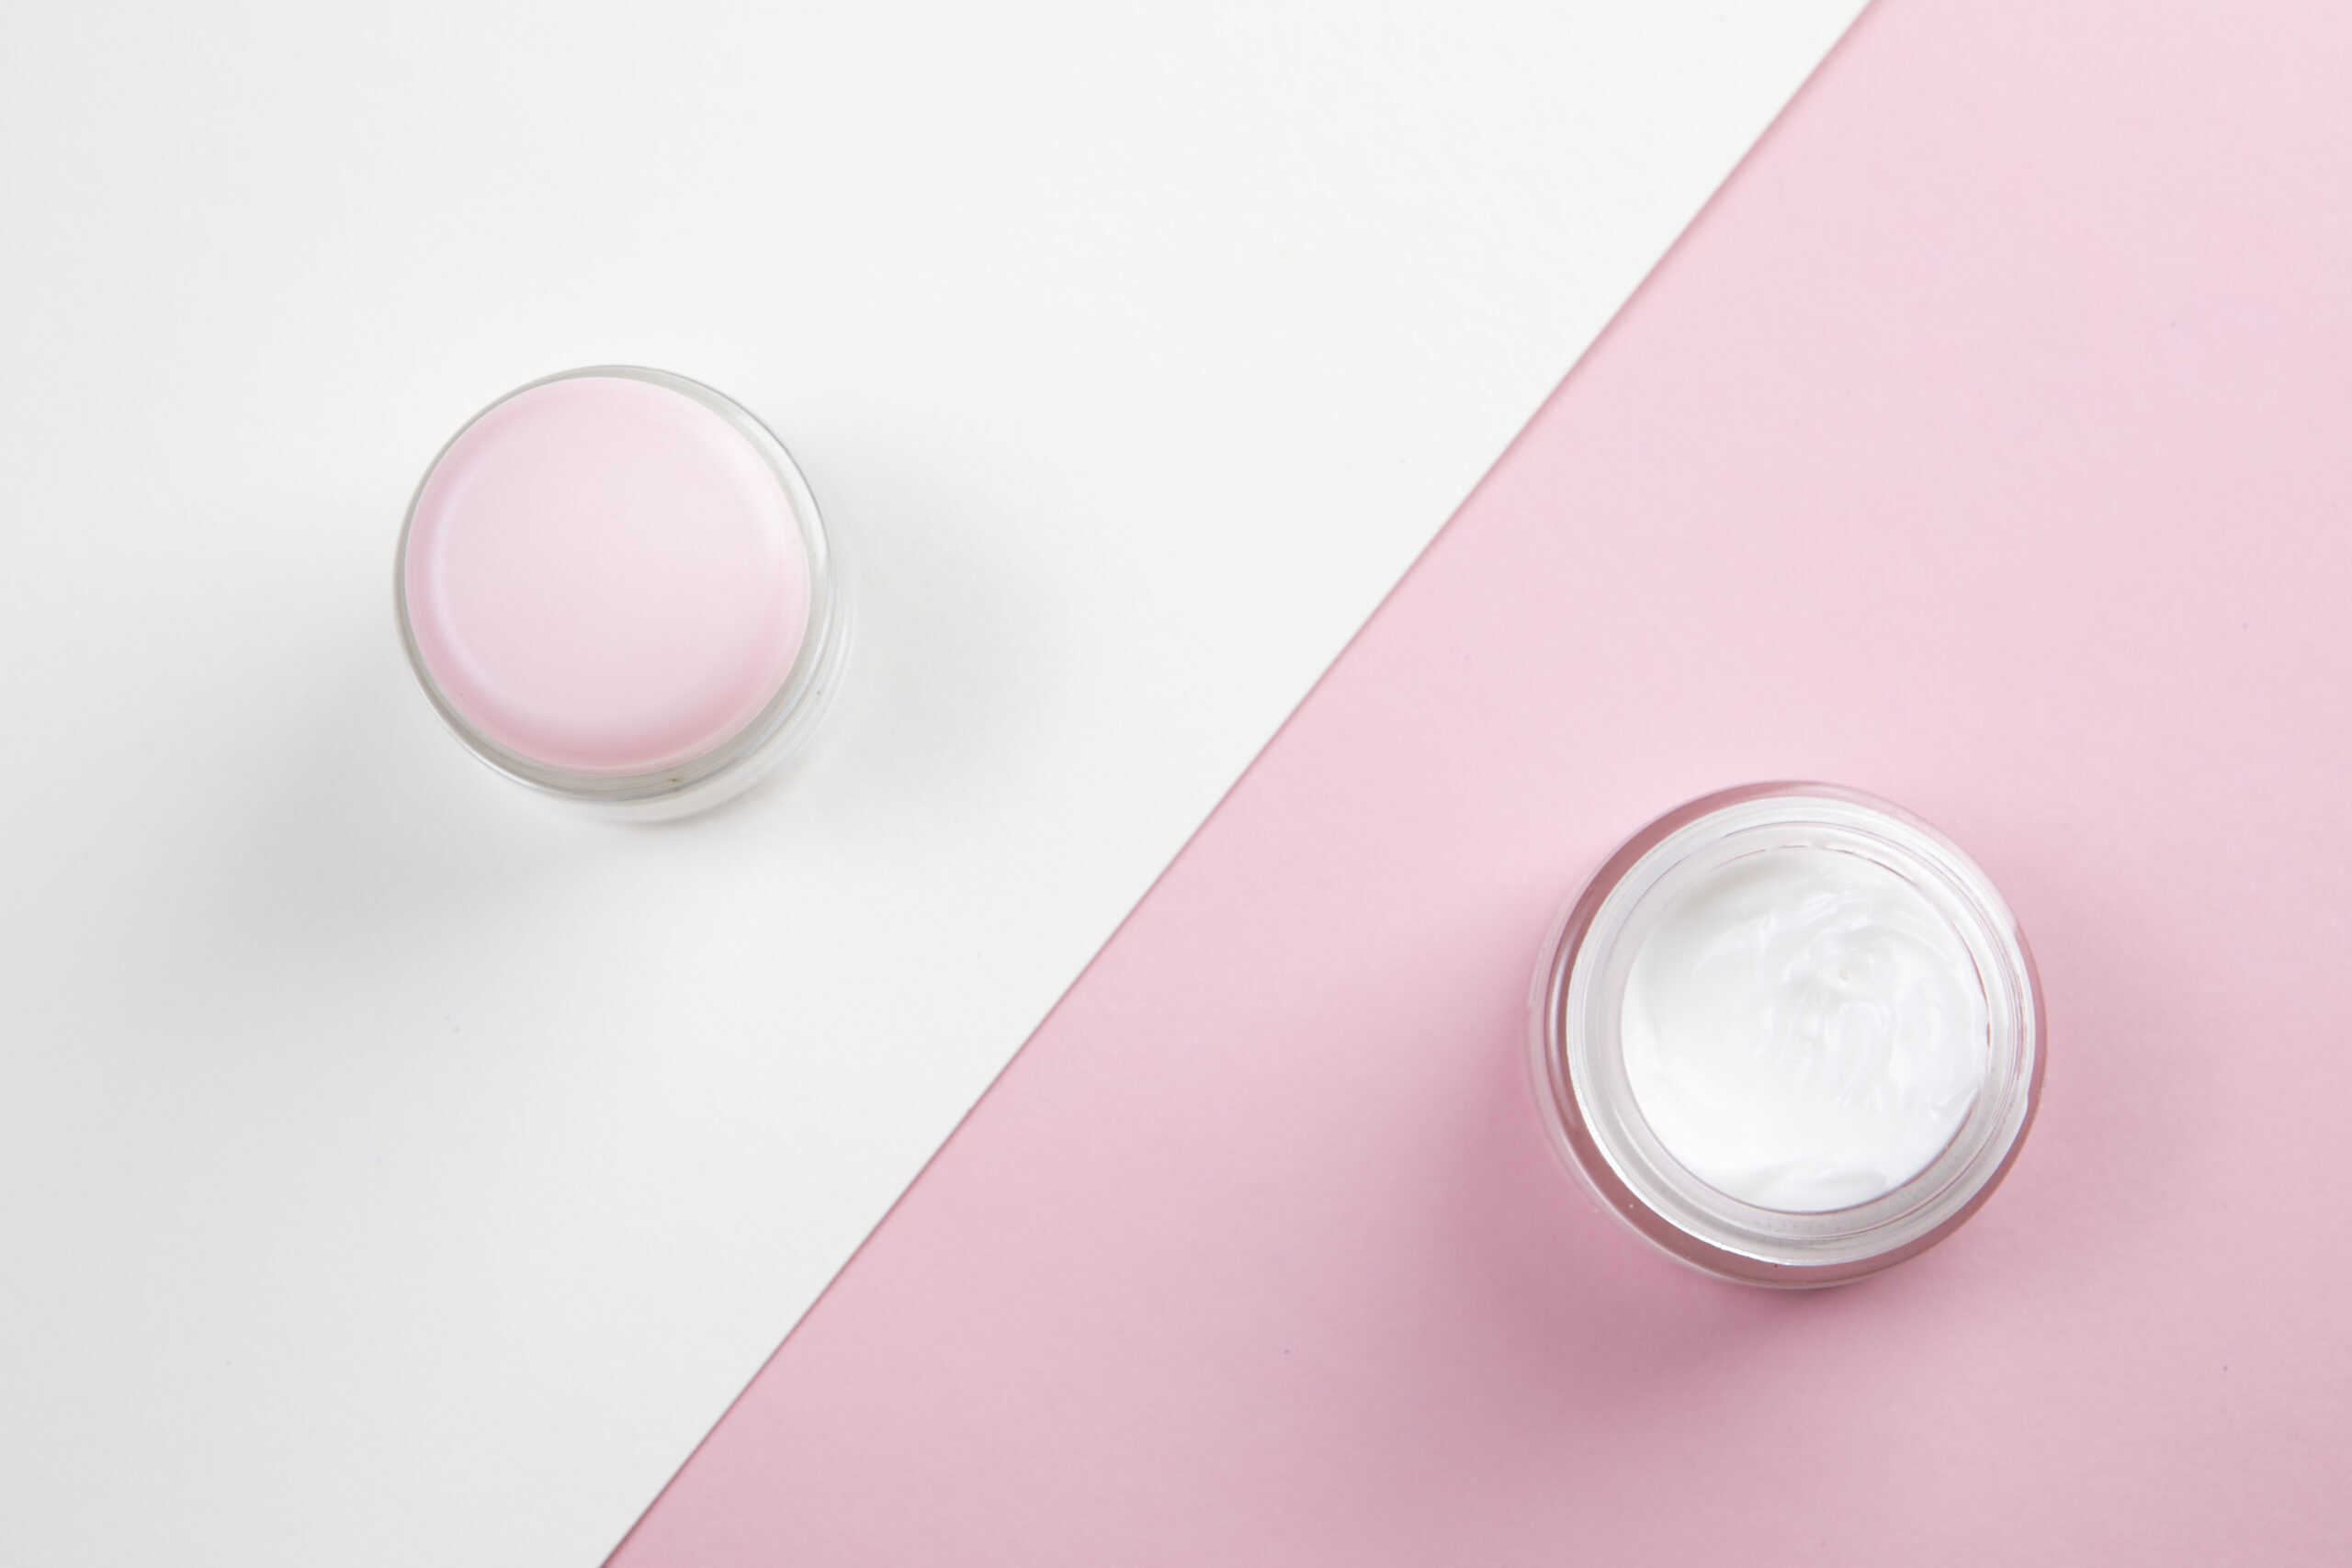 top-view-body-cream-pink-white-background